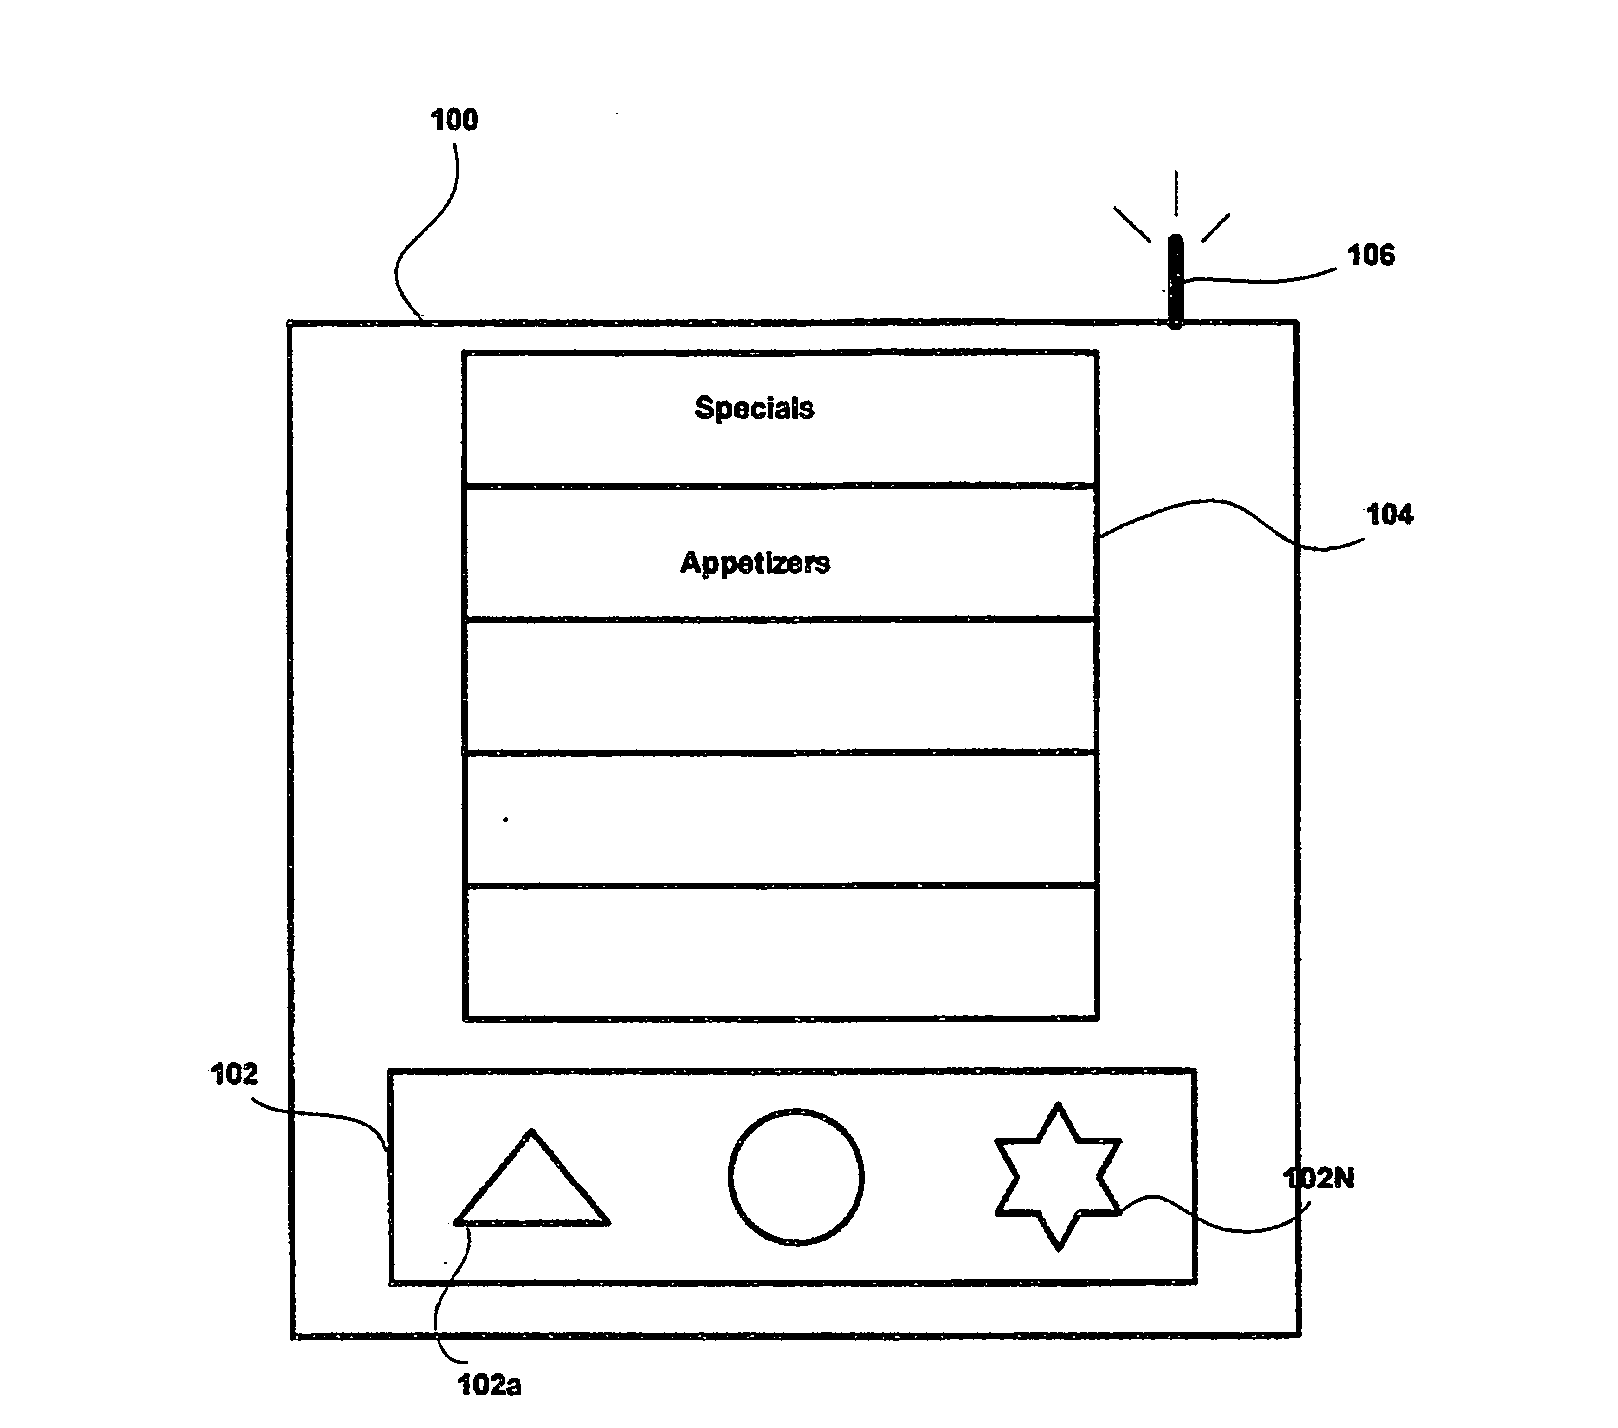 Method and apparatus for assisting vision impaired individuals with selecting items from a list